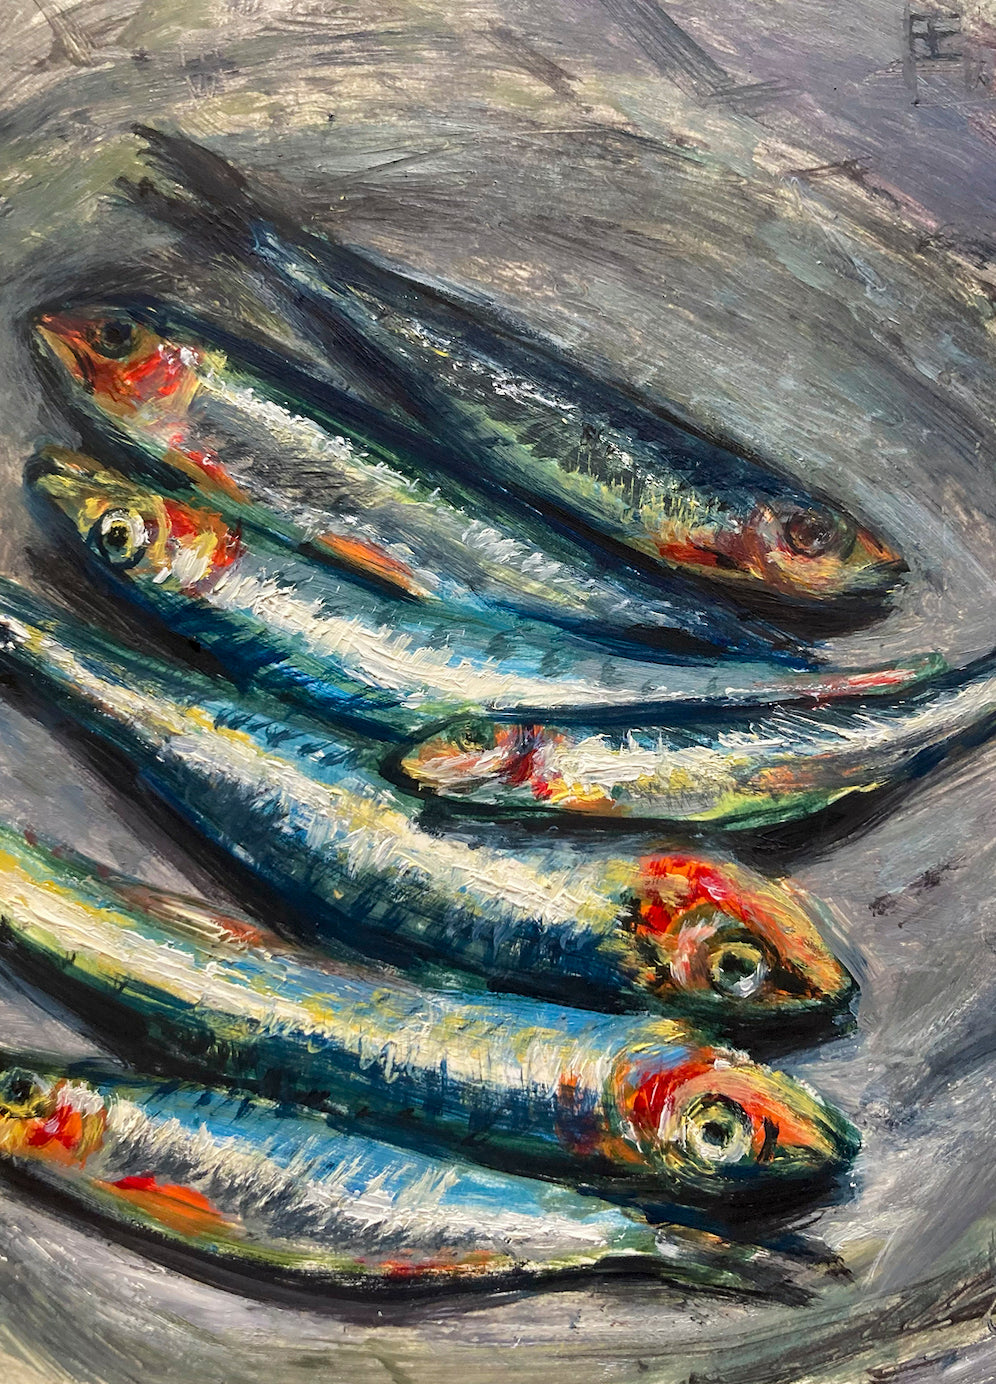 Seven colorful sardines laid out on a silver background; artist E.E. Jacks; 5"Wx7"H